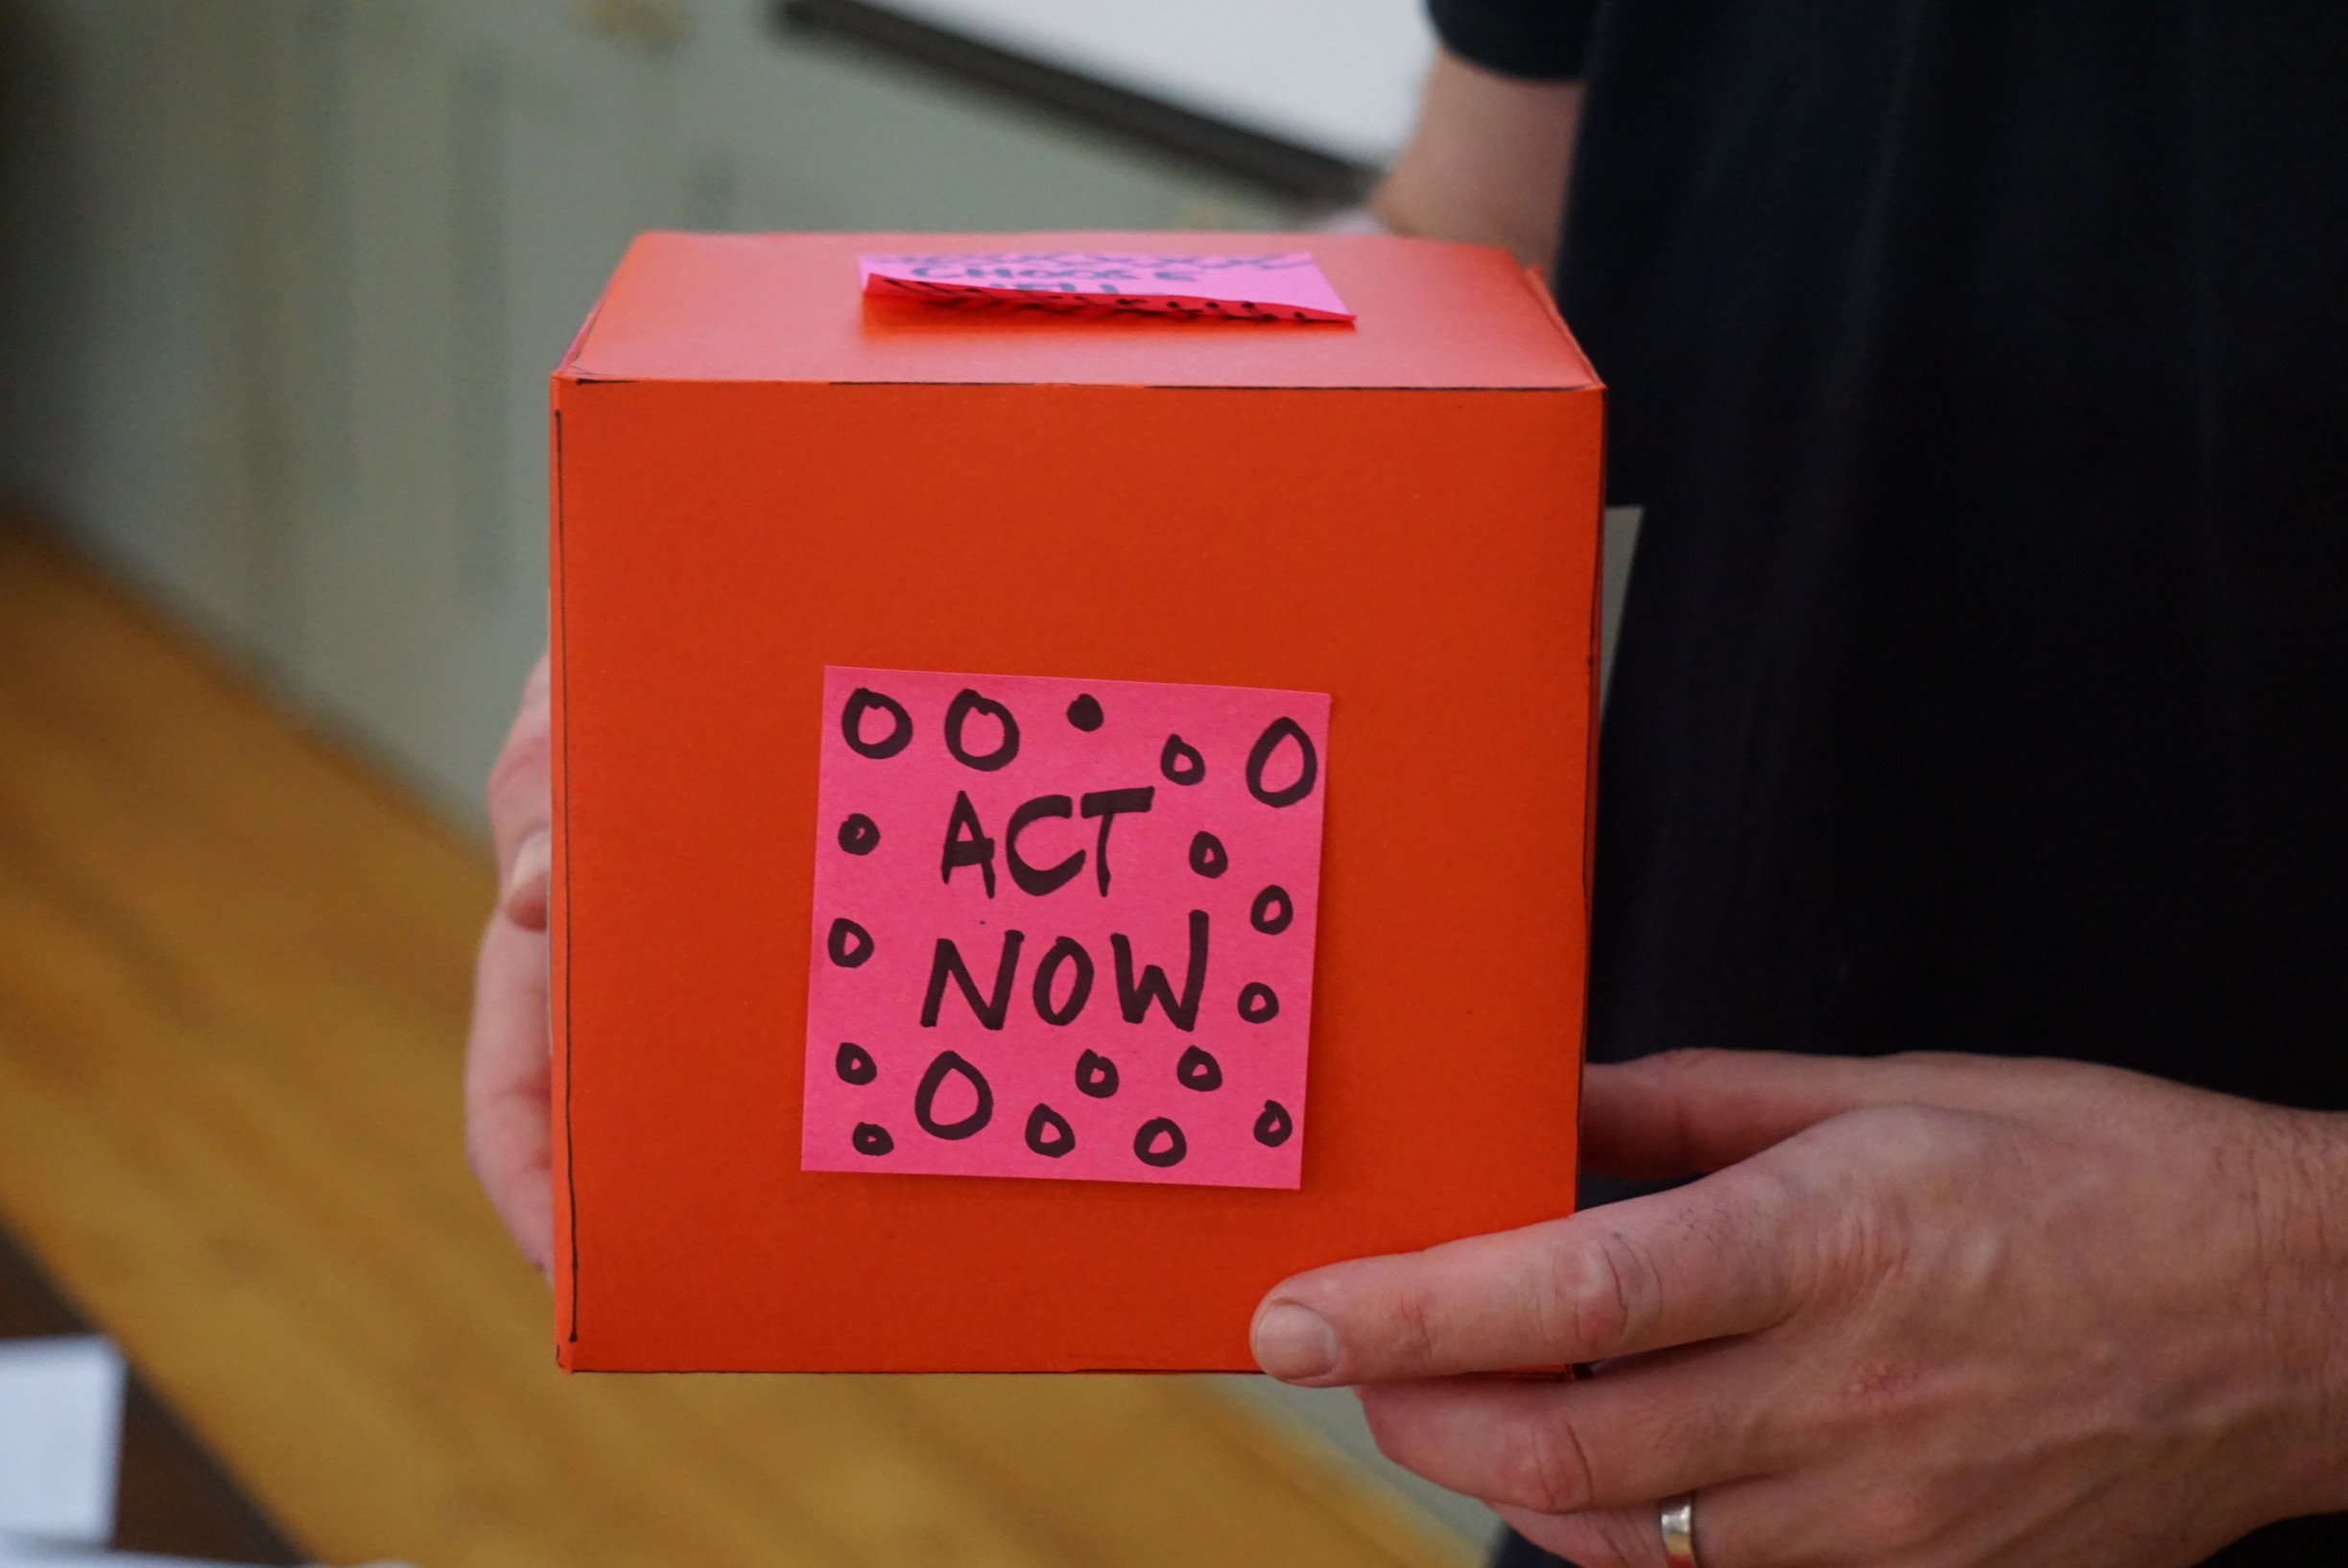 A prototype product create during a "Product Box" innovation workshop